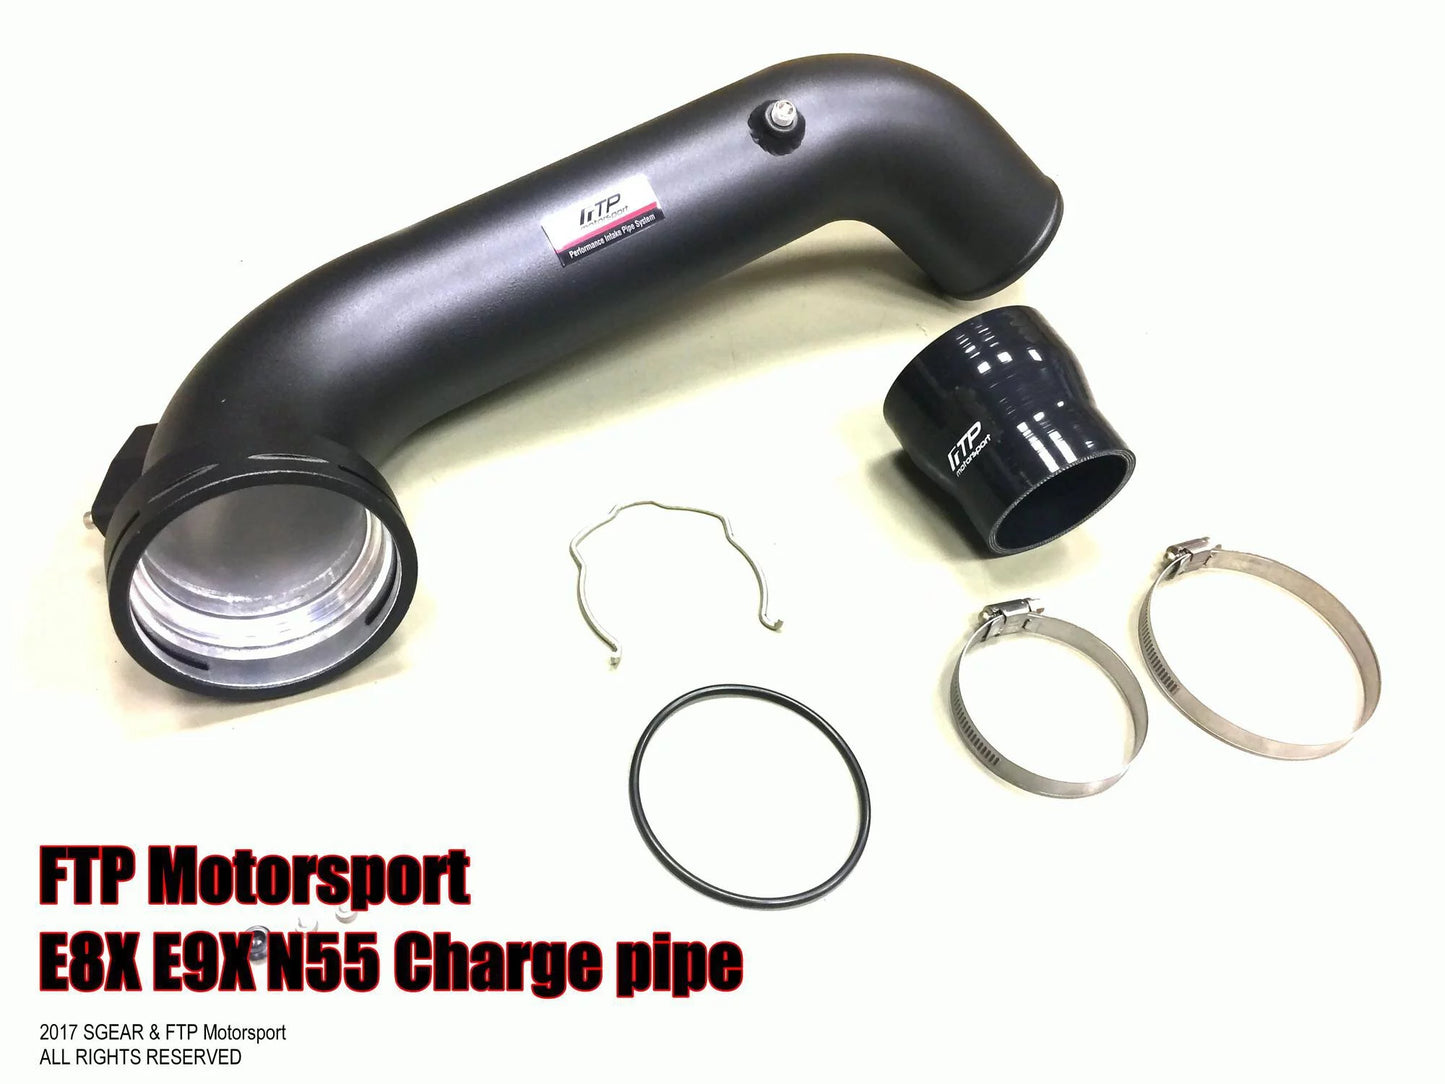 FTP Chargepipe || N55 (E8X,E9X)